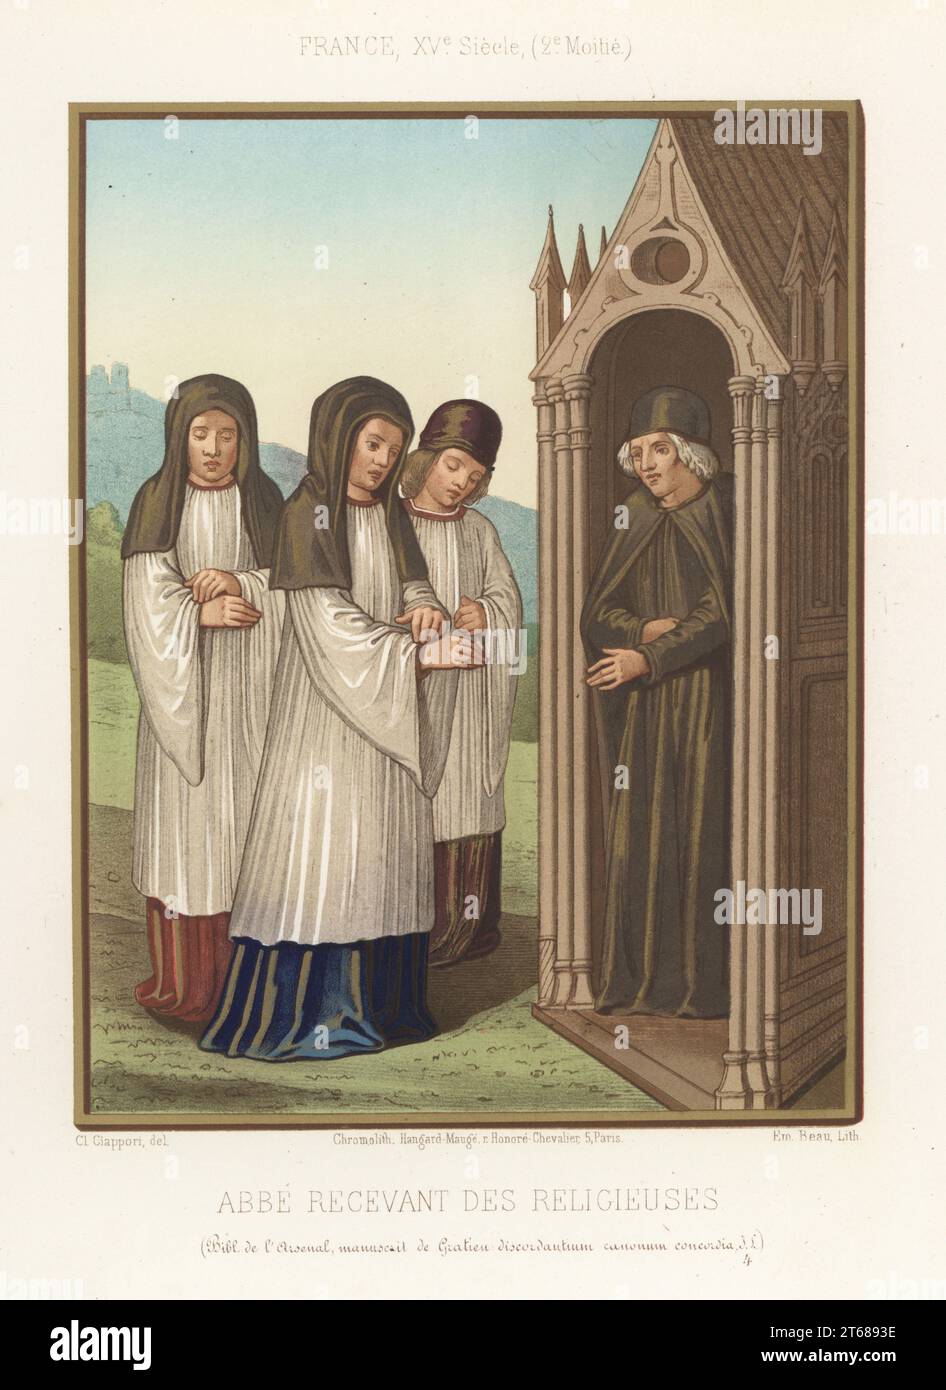 Three nuns visit an abbot, France, 15th century. The nuns in veils and habits, the abbot standing in a gothic gabled porch. Abbe recevant des religieuses. France, XVe siecle. From Gratian's Decretum manuscript, MS JL4, Bibliotheque de l'Arsenal. Chromolithograph by Emile Beau after an illustration by Claudius Joseph Ciappori from Charles Louandres Les Arts Somptuaires, The Sumptuary Arts, Hangard-Mauge, Paris, 1858. Stock Photo